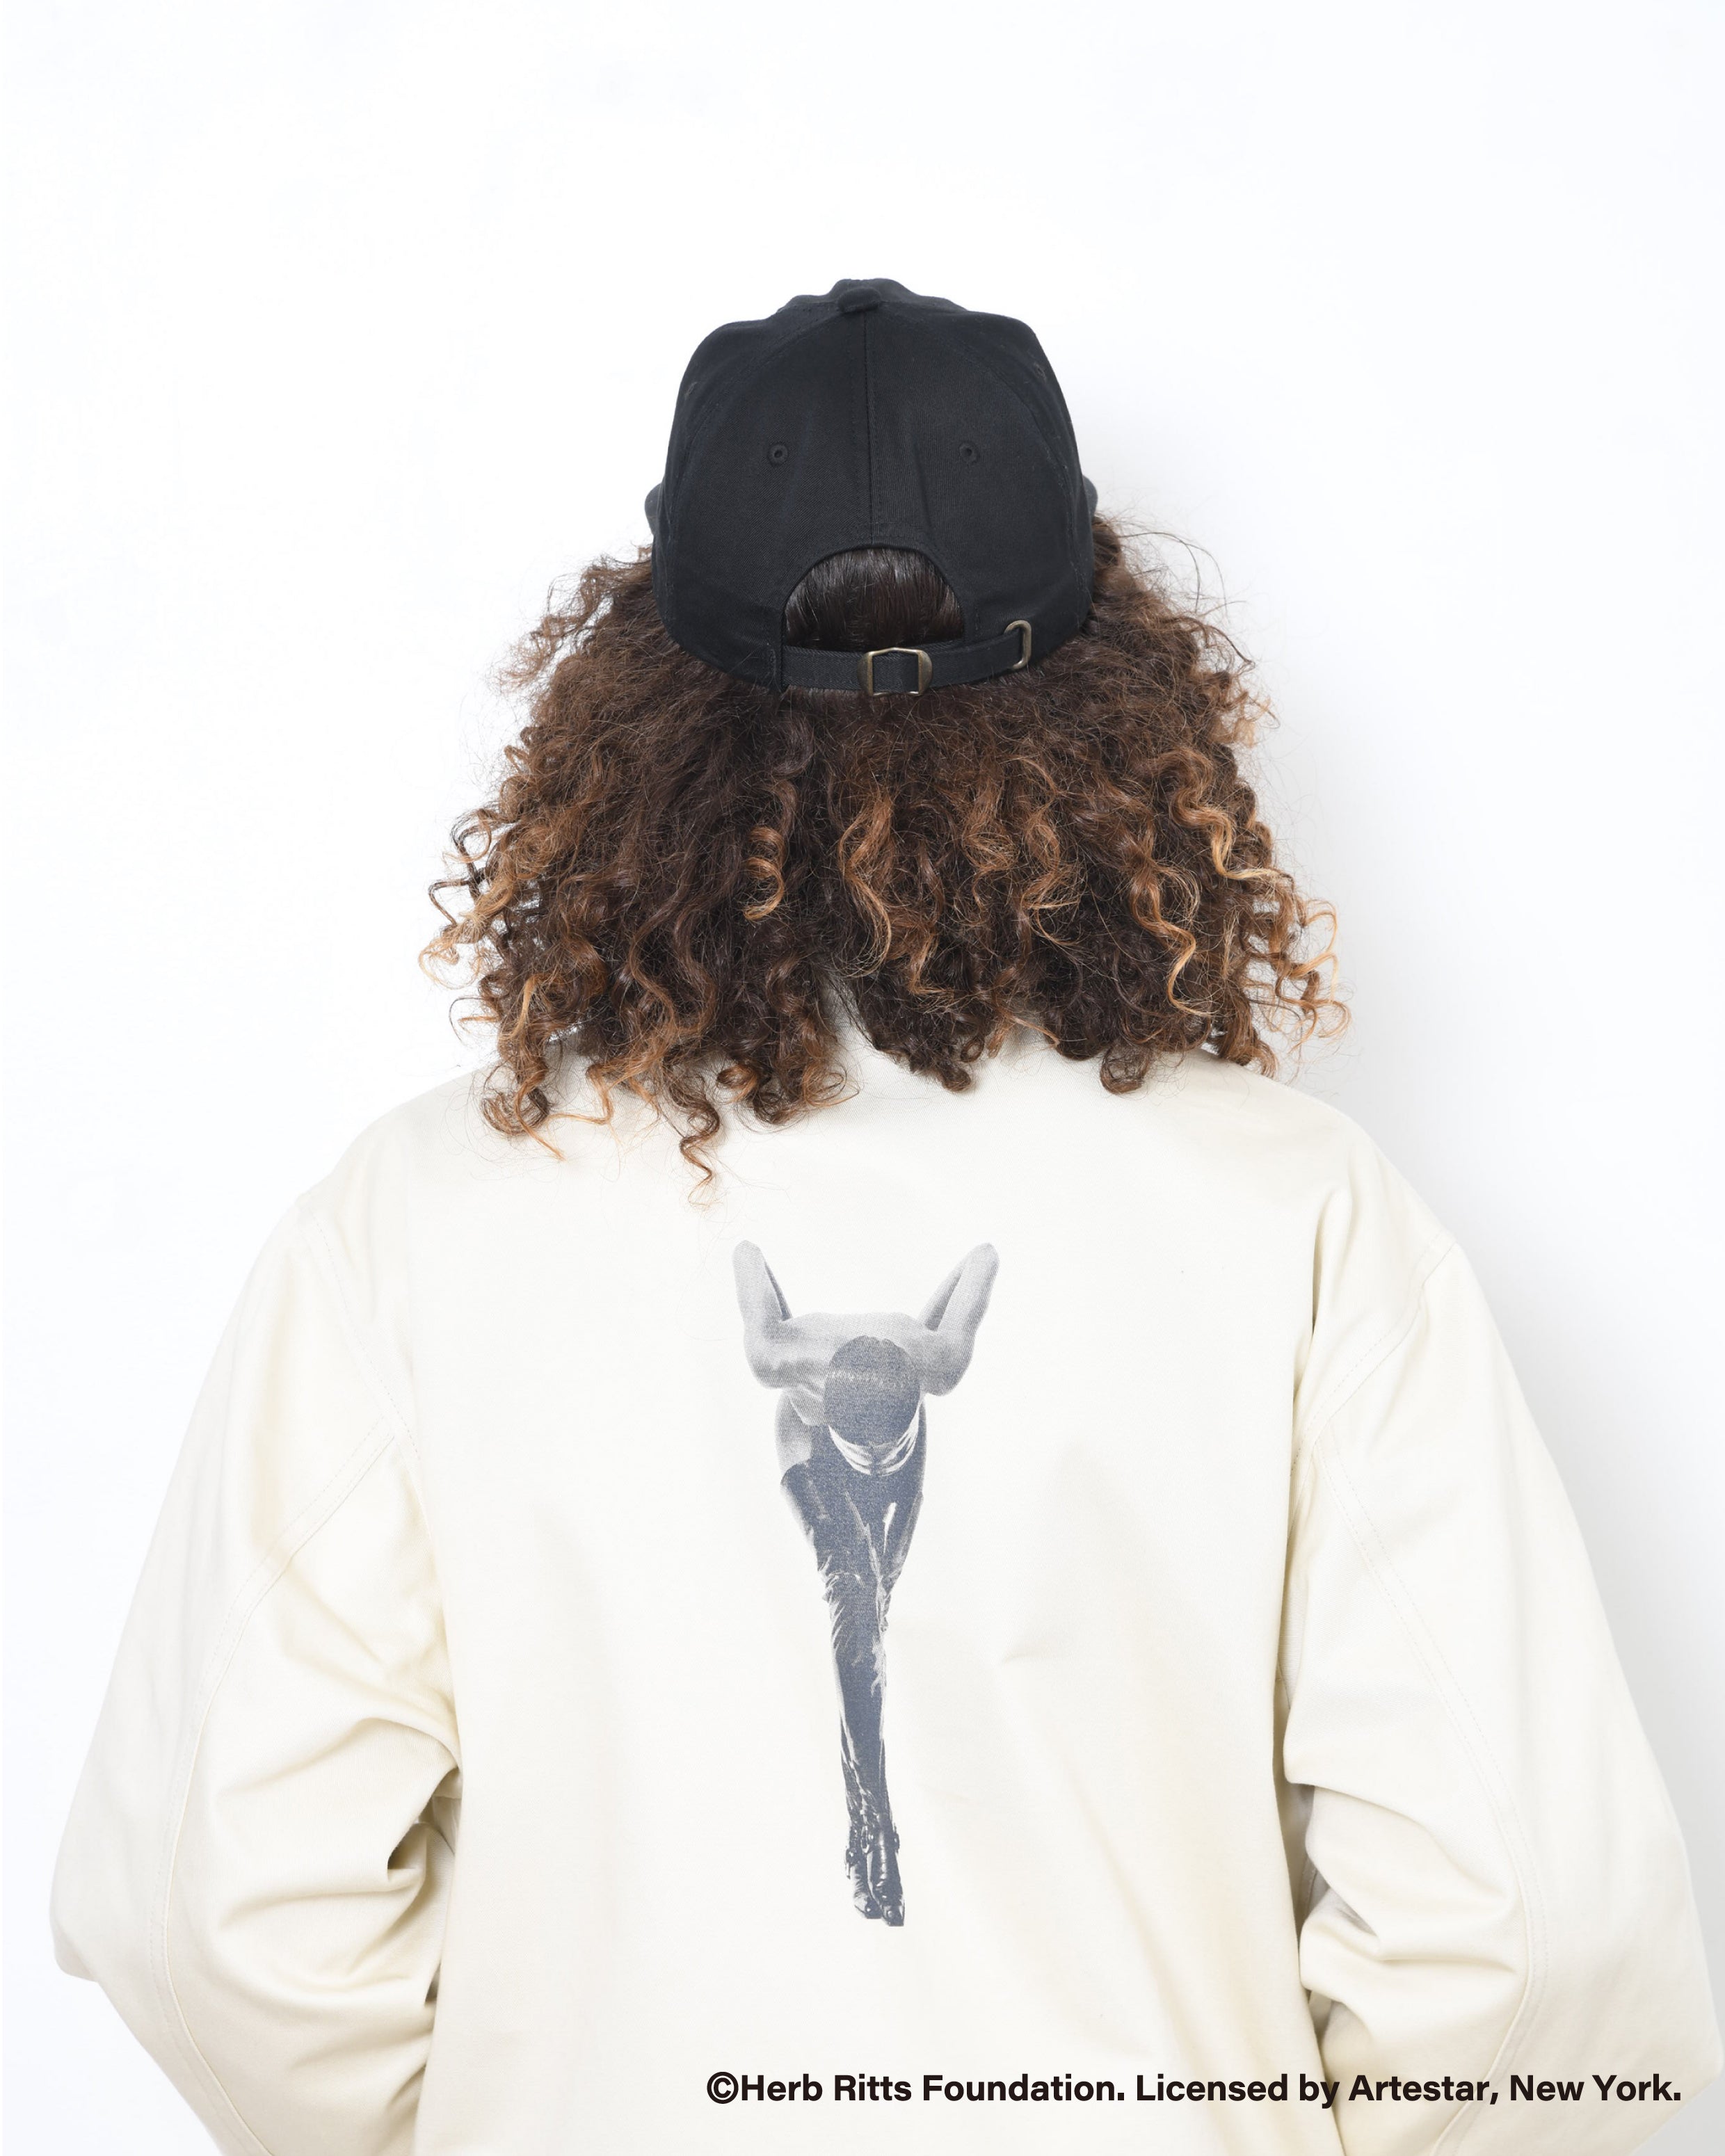 BOW WOW / HERB RITTS COLLECTION】HERB RITTS LOGO CAP – C30